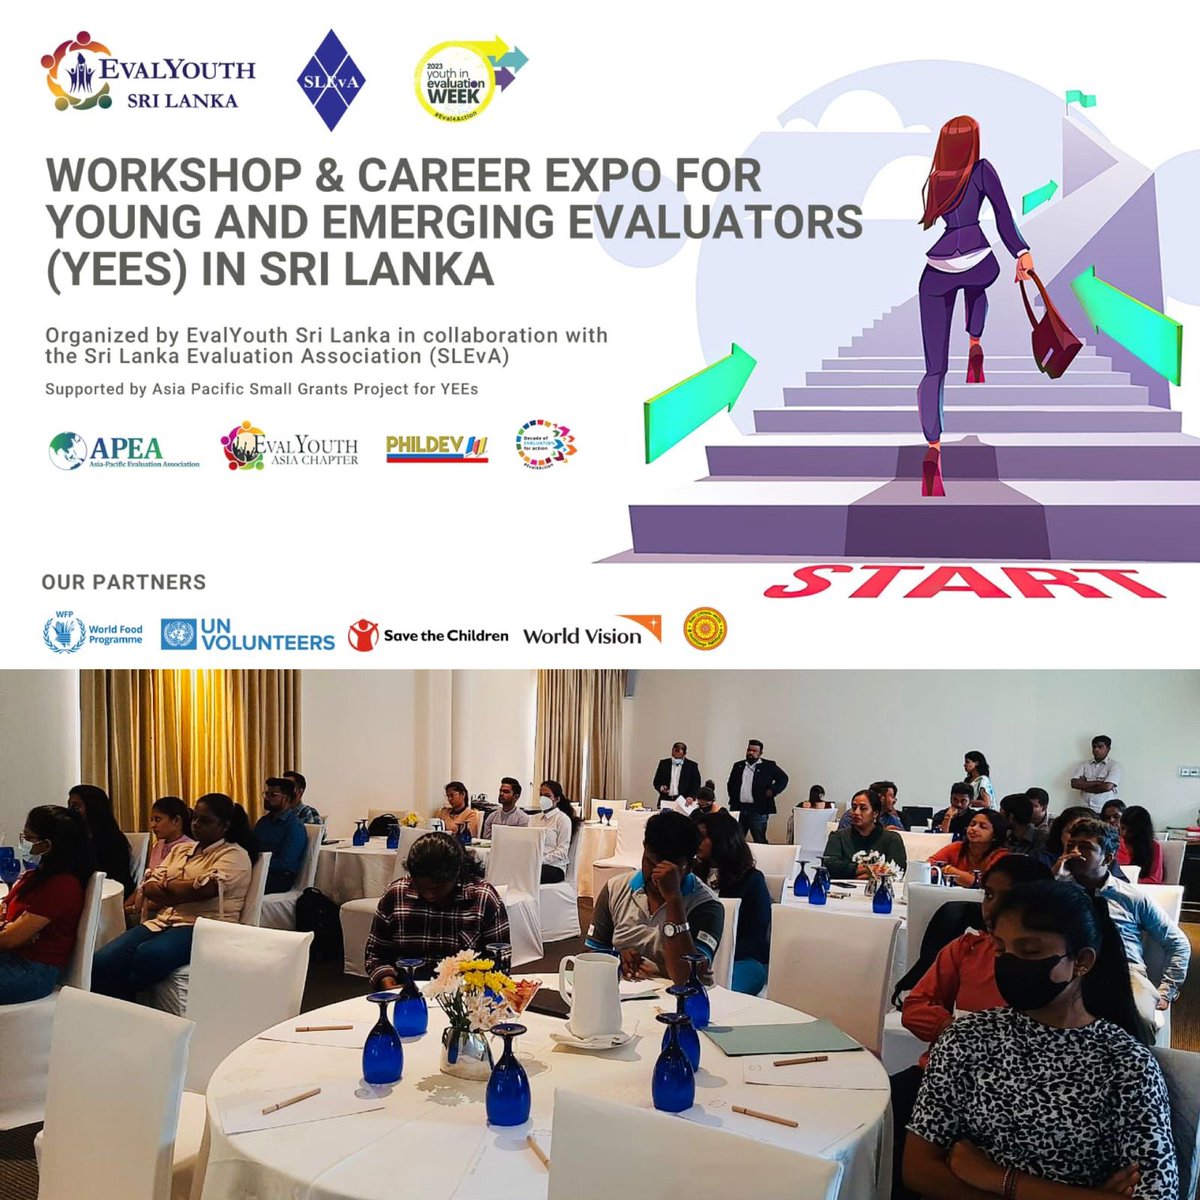 Happening now!👏👏

The workshop and #CareerExpo for YEEs in Sri Lanka organized by the @EvalYouthSL 

#APCHub #Eval4Action #YouthInEvalWeek #AsiaPacificYEEs @unfpa_eval @EvalyouthAsia @Eval_Youth @APEAeval